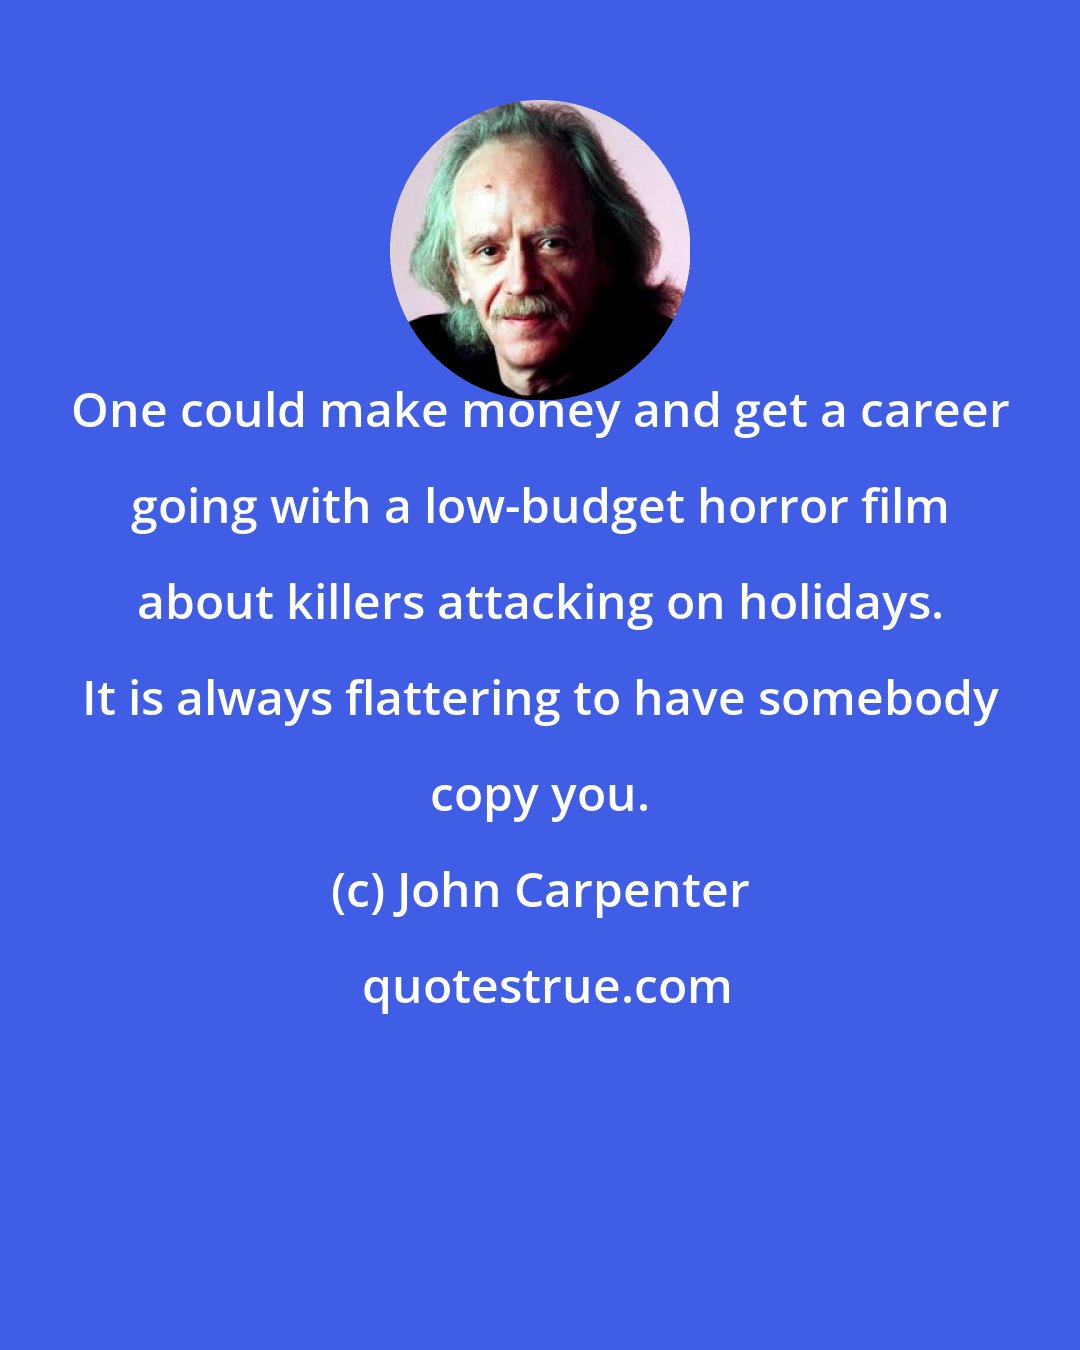 John Carpenter: One could make money and get a career going with a low-budget horror film about killers attacking on holidays. It is always flattering to have somebody copy you.